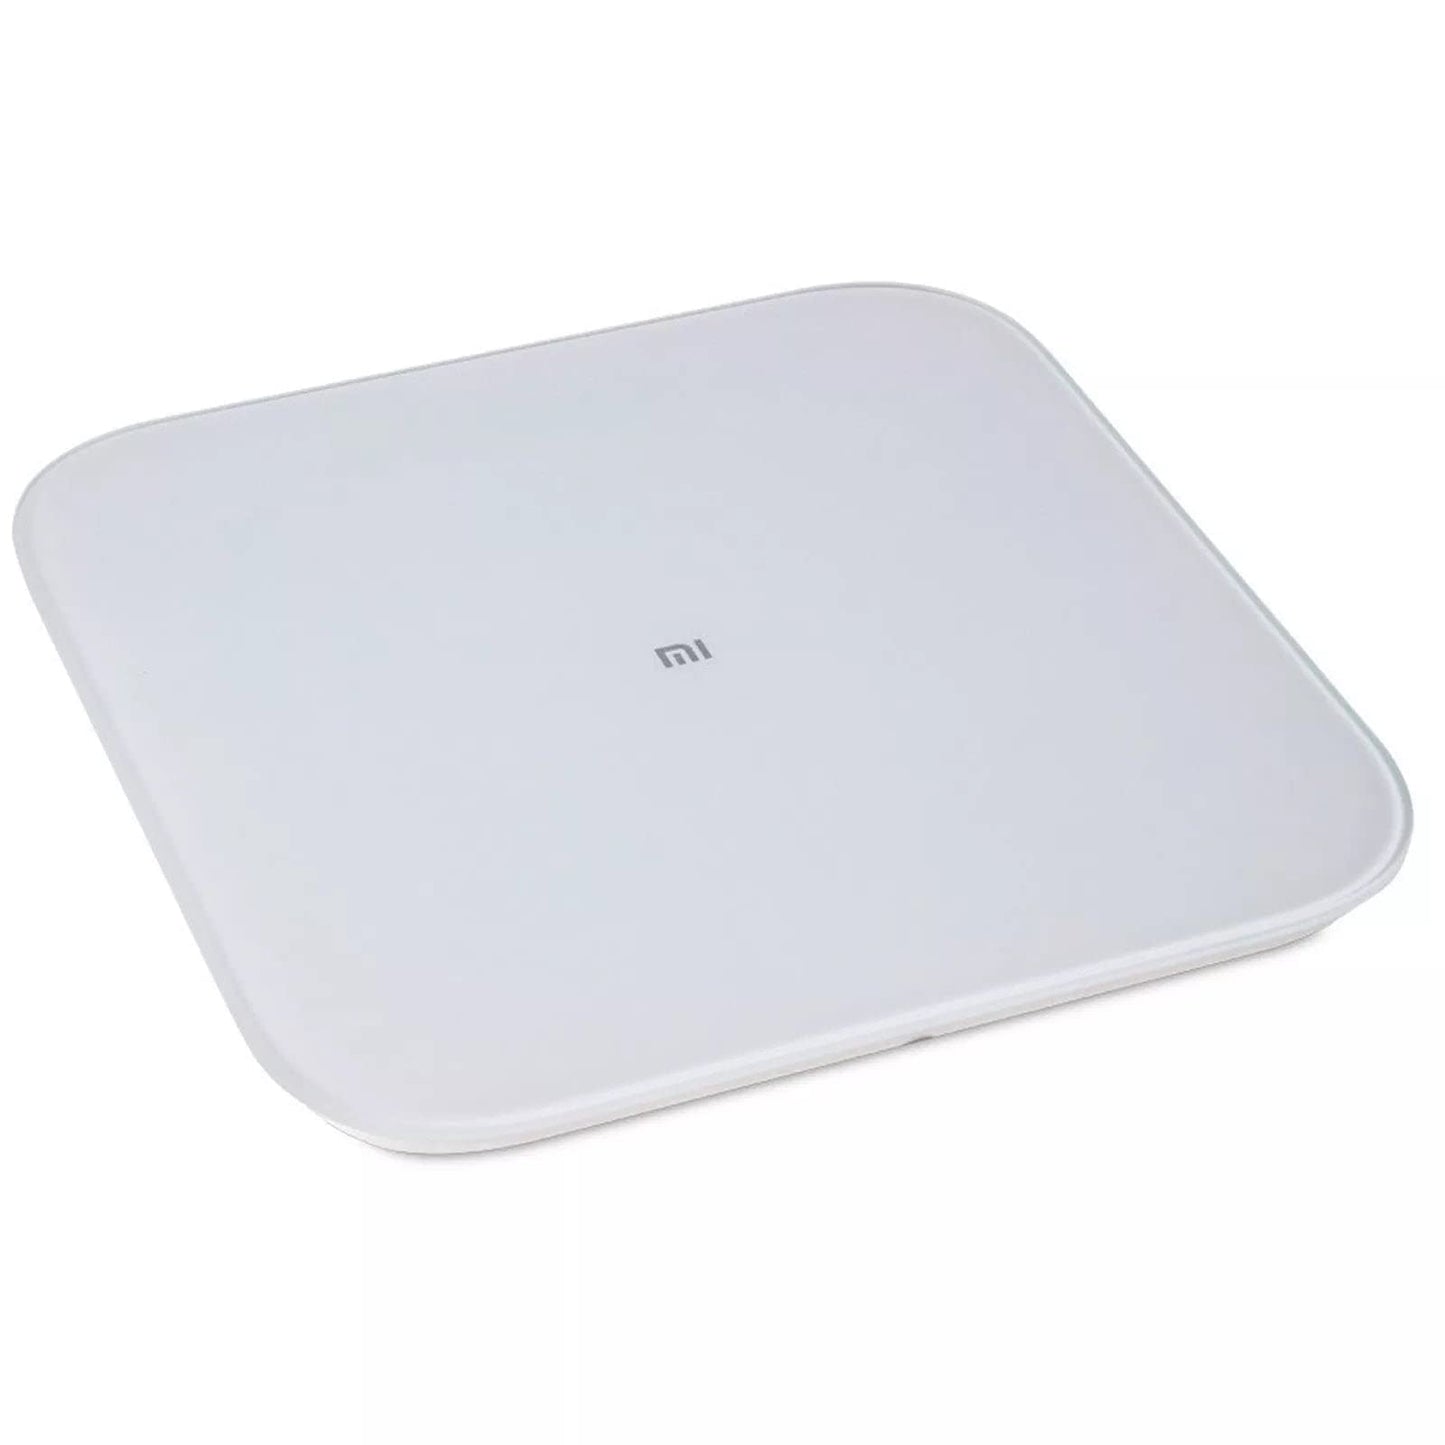 Xiaomi Smart Weight Scale, Weighing Scale 2 Bluetooth 5.0 Precision Fitness Xmtzc04Hm, White